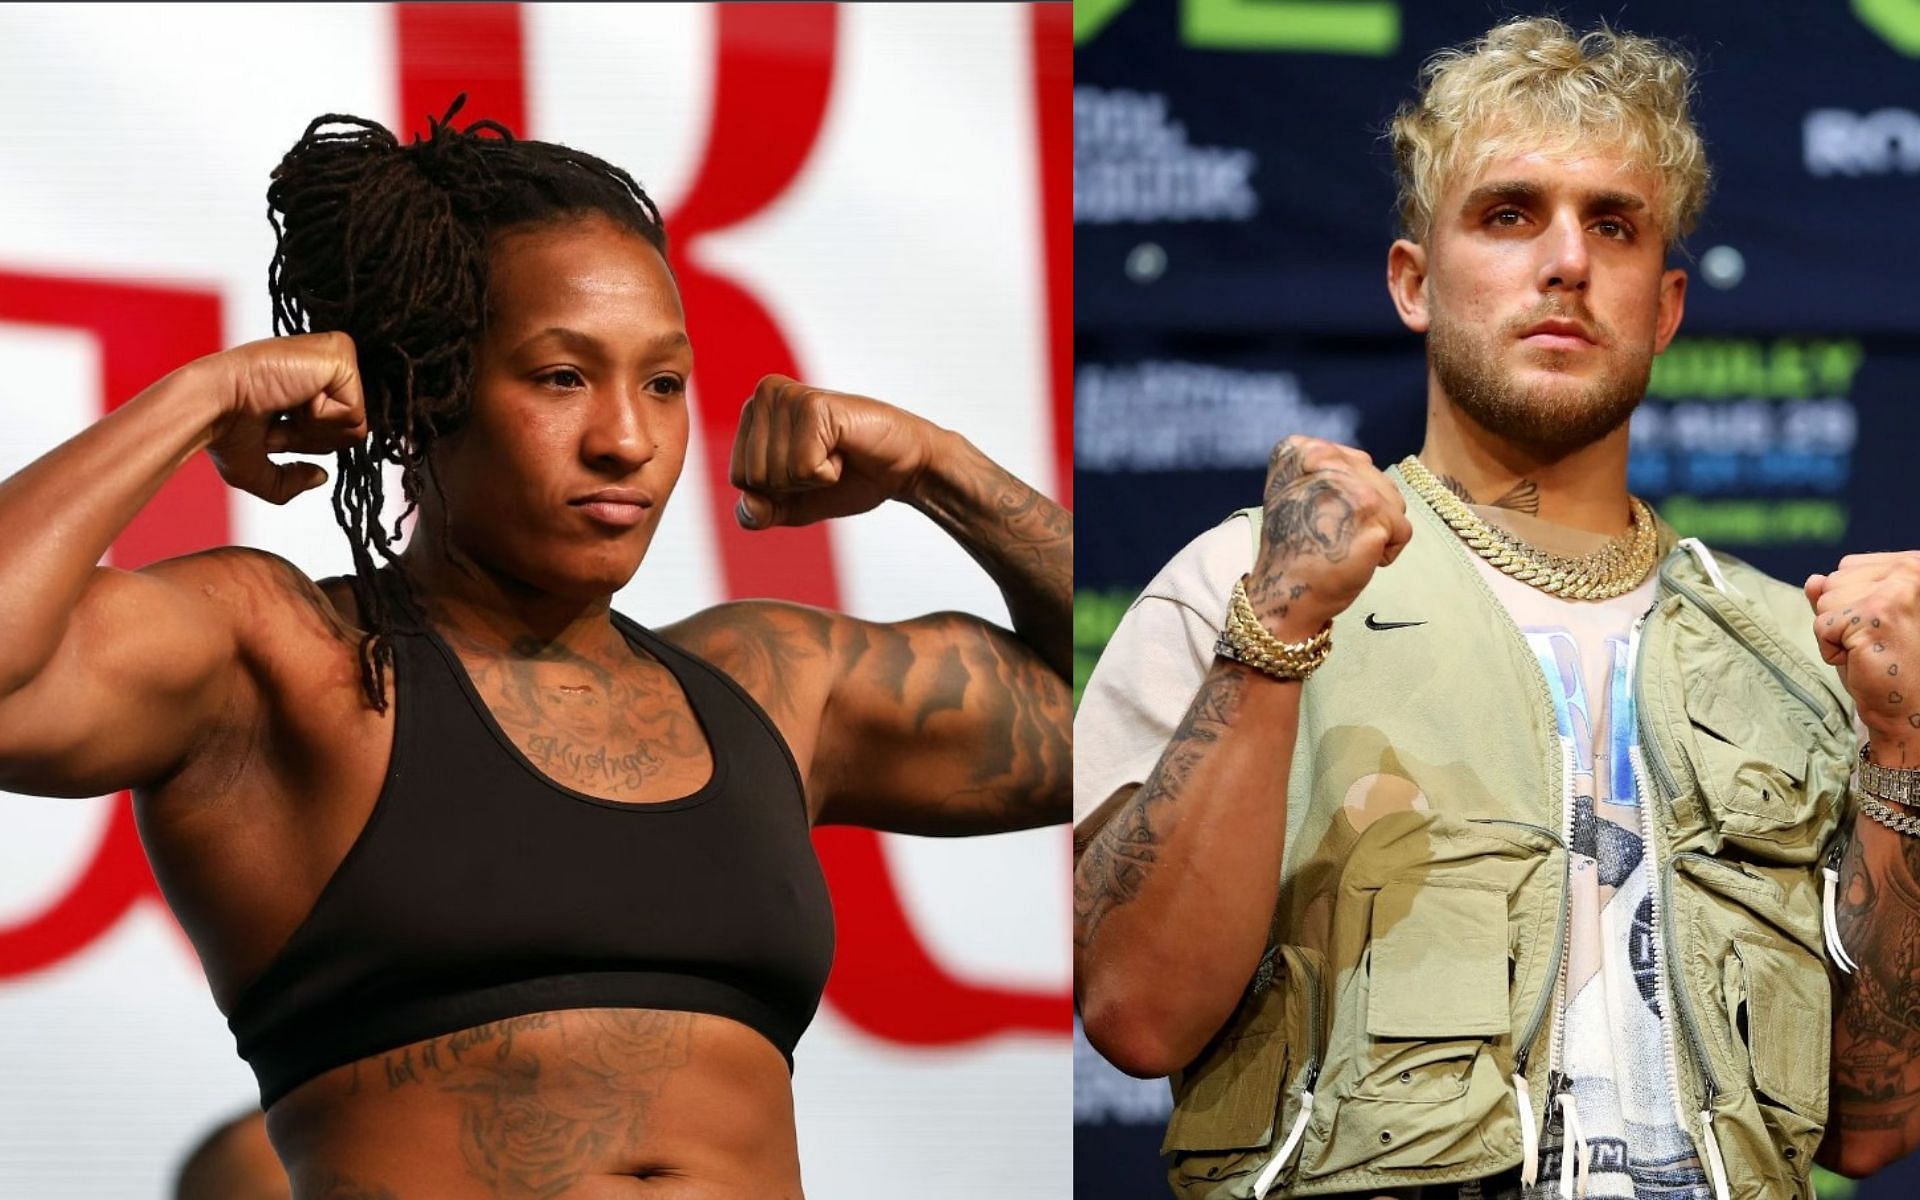 Shadasia Green (Left) and Jake Paul (Right)  (Image credits: Getty Images)